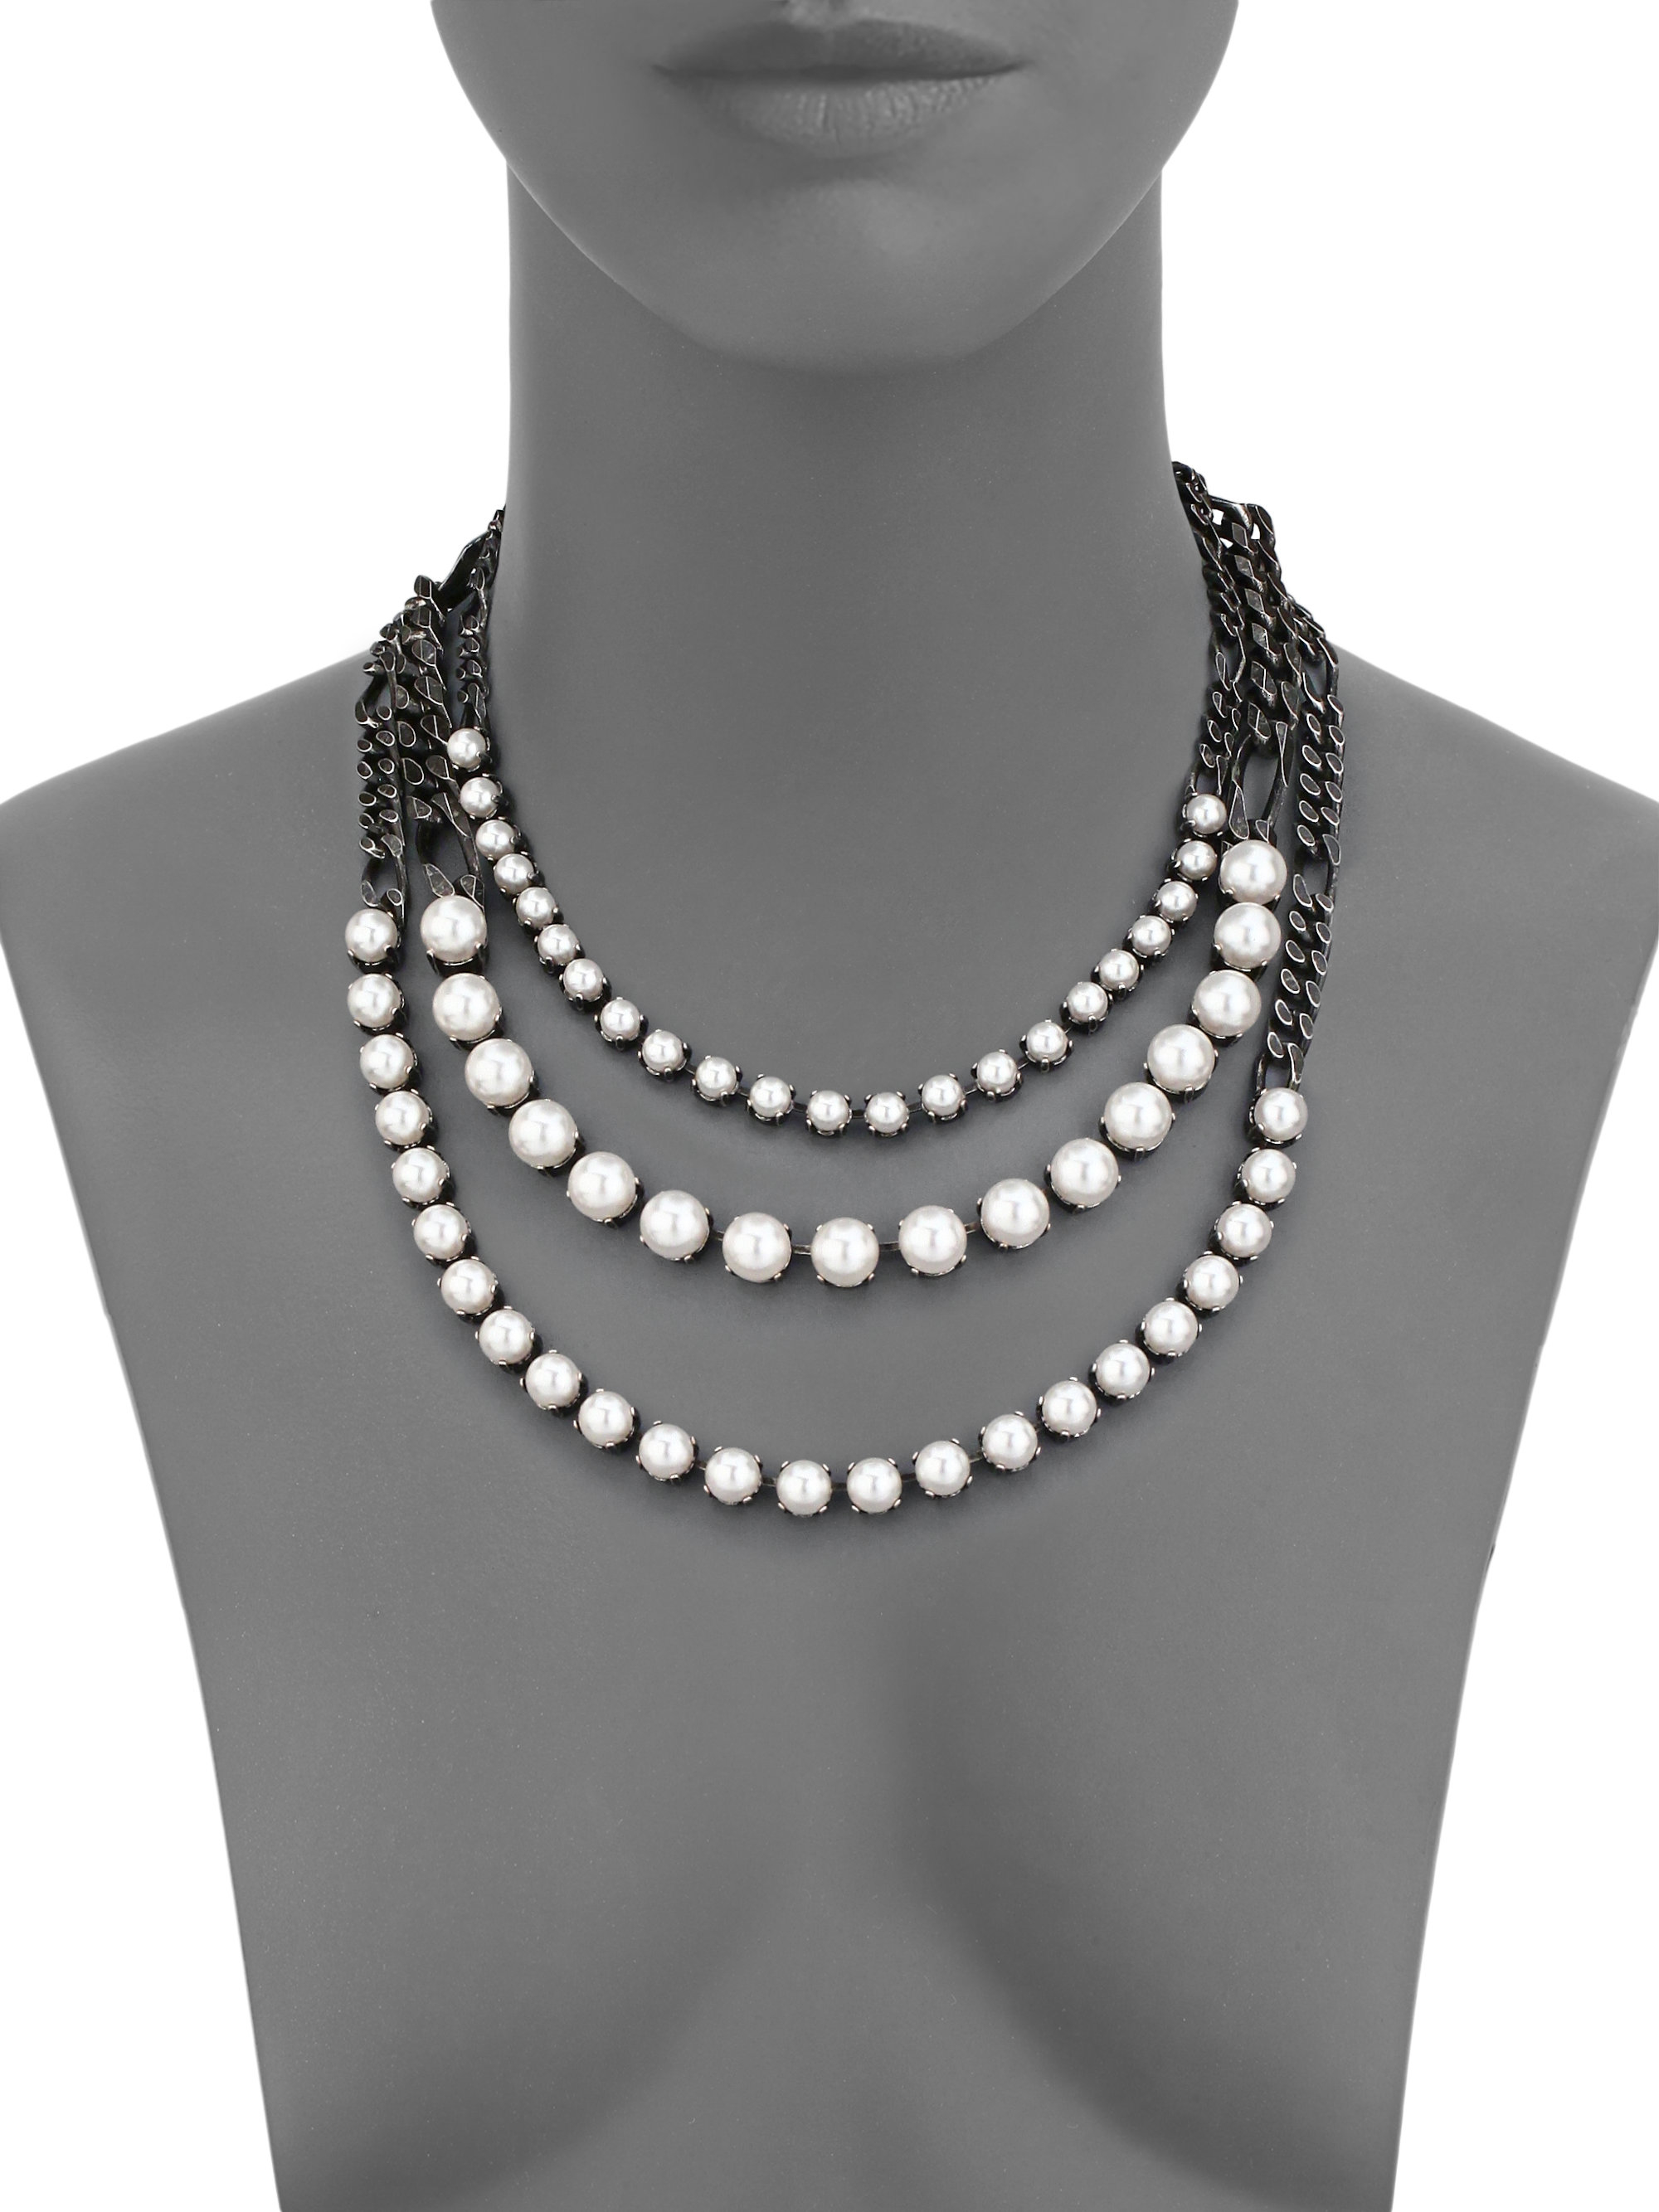 Lyst - Lanvin Faux Pearl Three-strand Chain Necklace in Gray